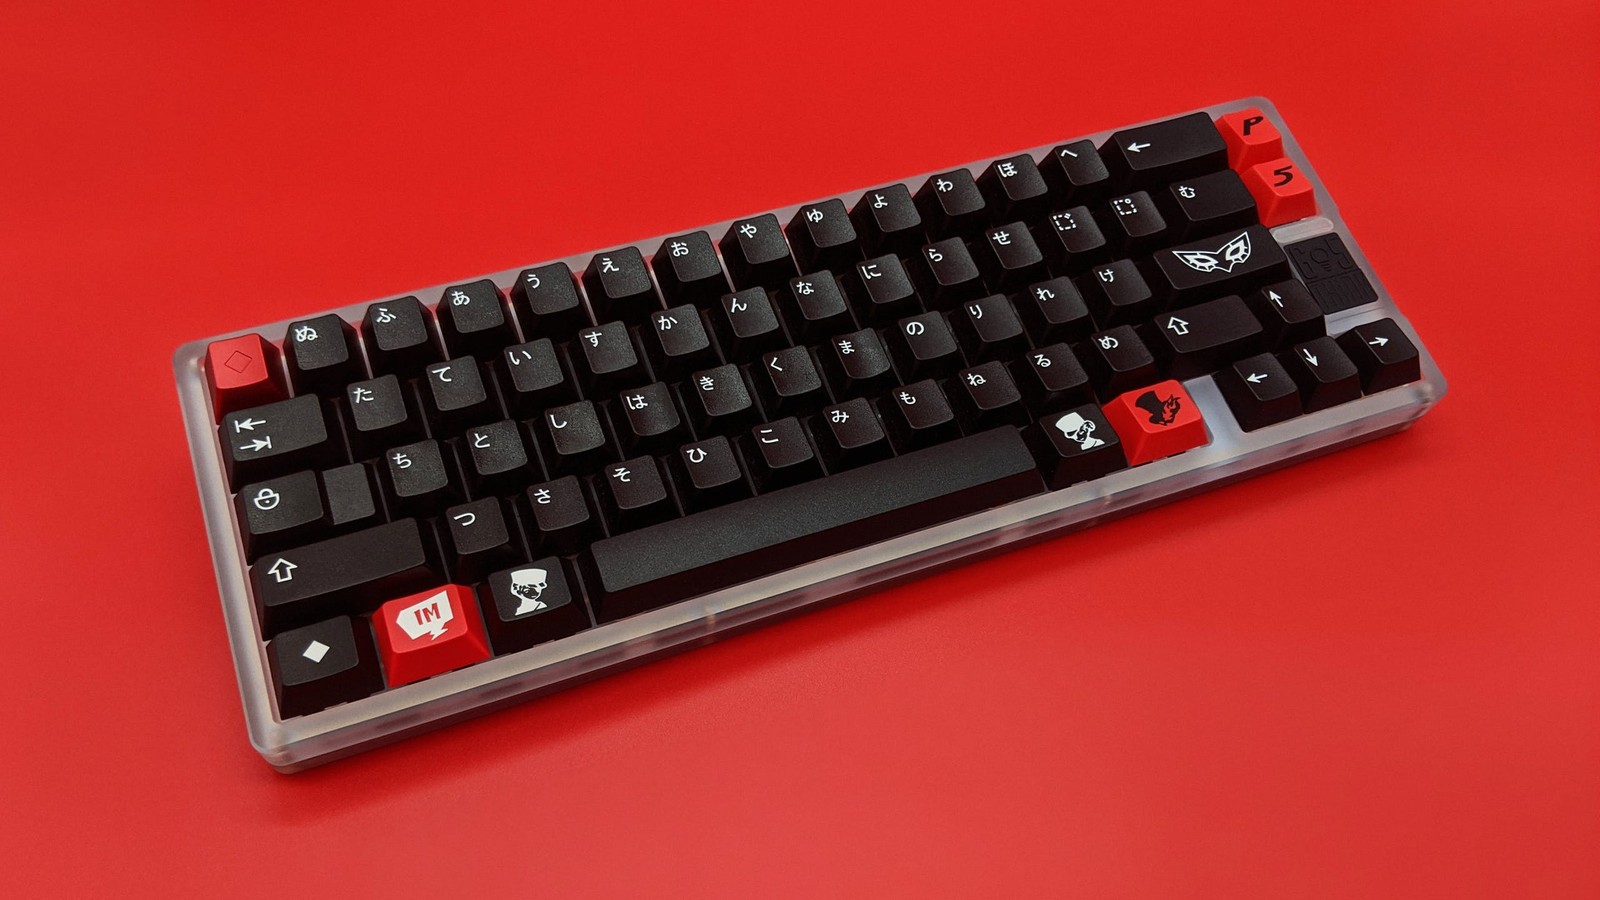 GMK WoB Hiragana with GMK Metaverse mods and novelties on Think 6.5 on red background